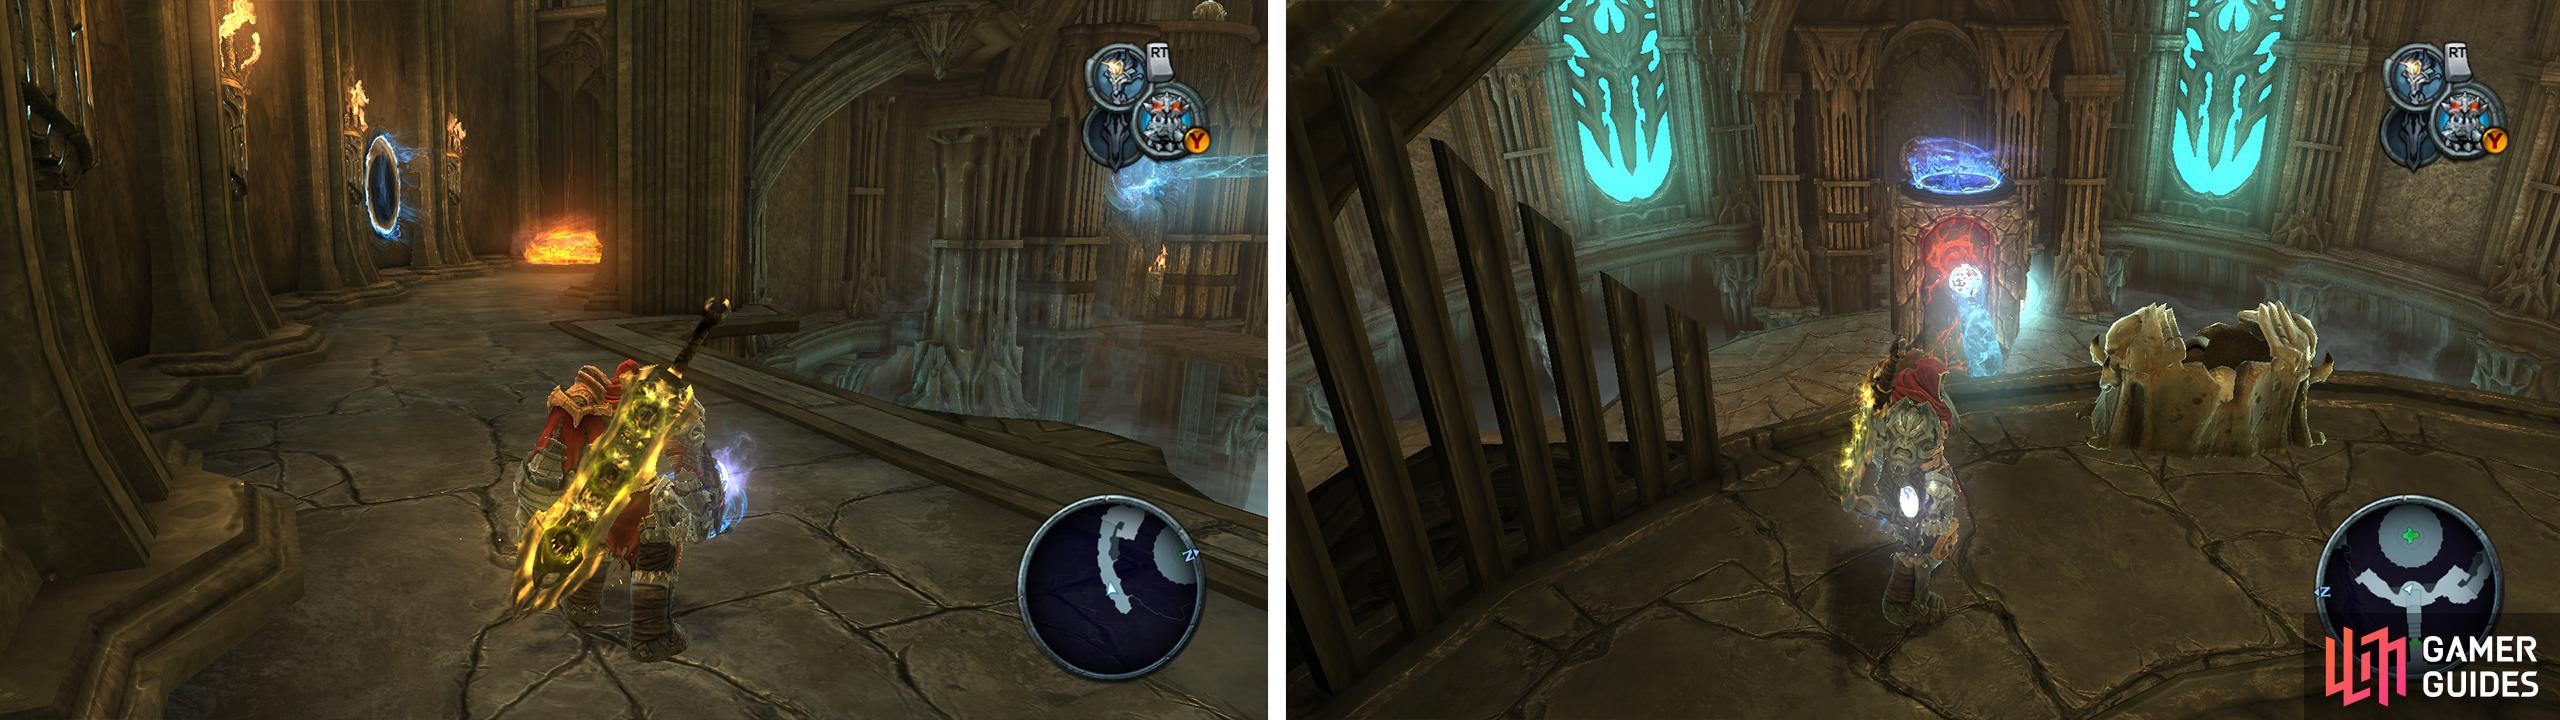 Use the portals (left) to access a balcony area. From here, shoot a charged portal on top of the central block (right) to reach an Artefact above.